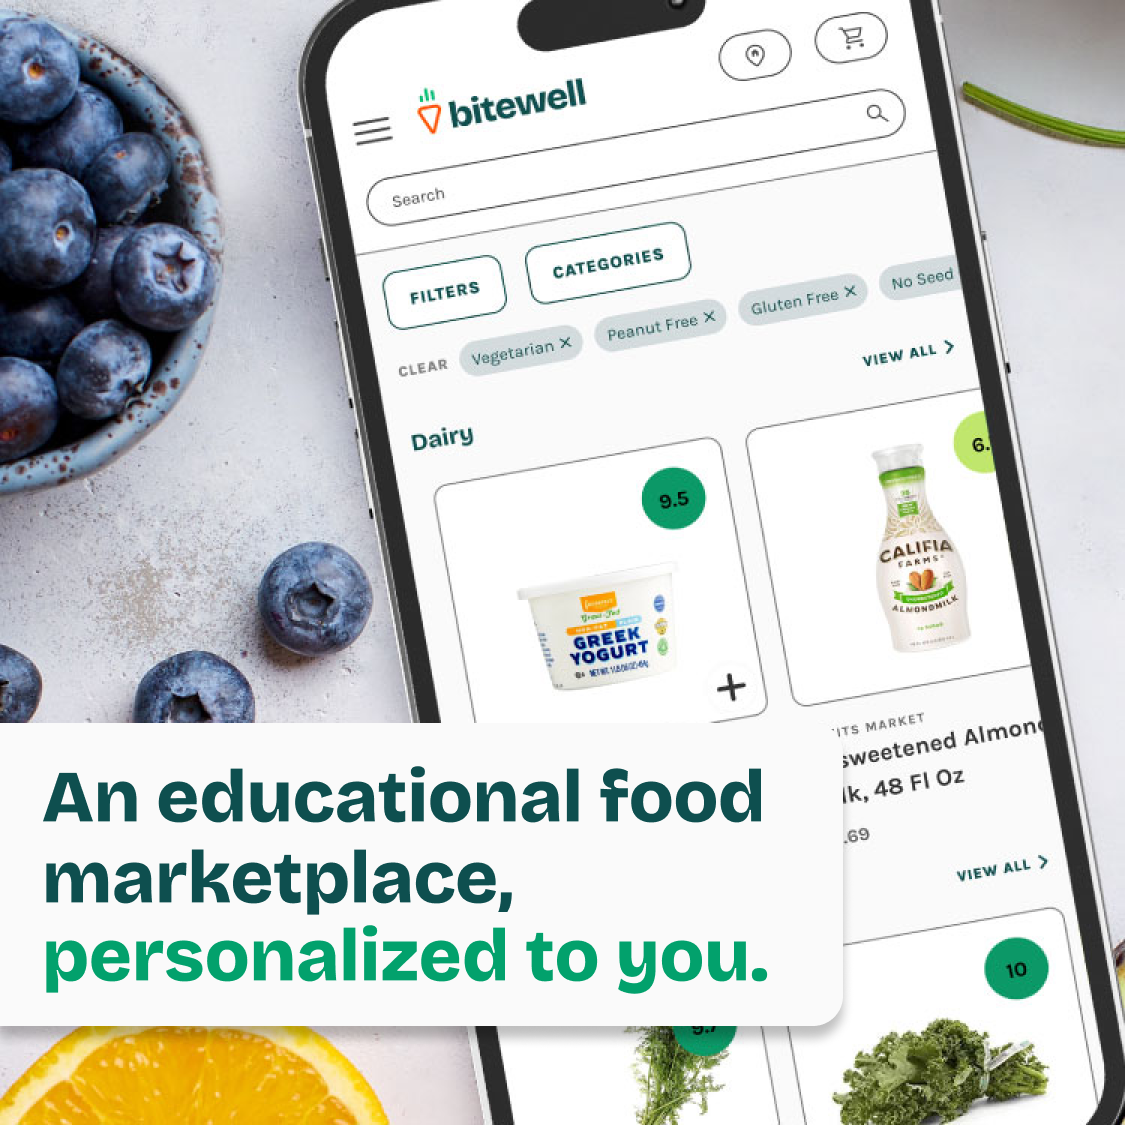 An educational marketplace personalized to you.